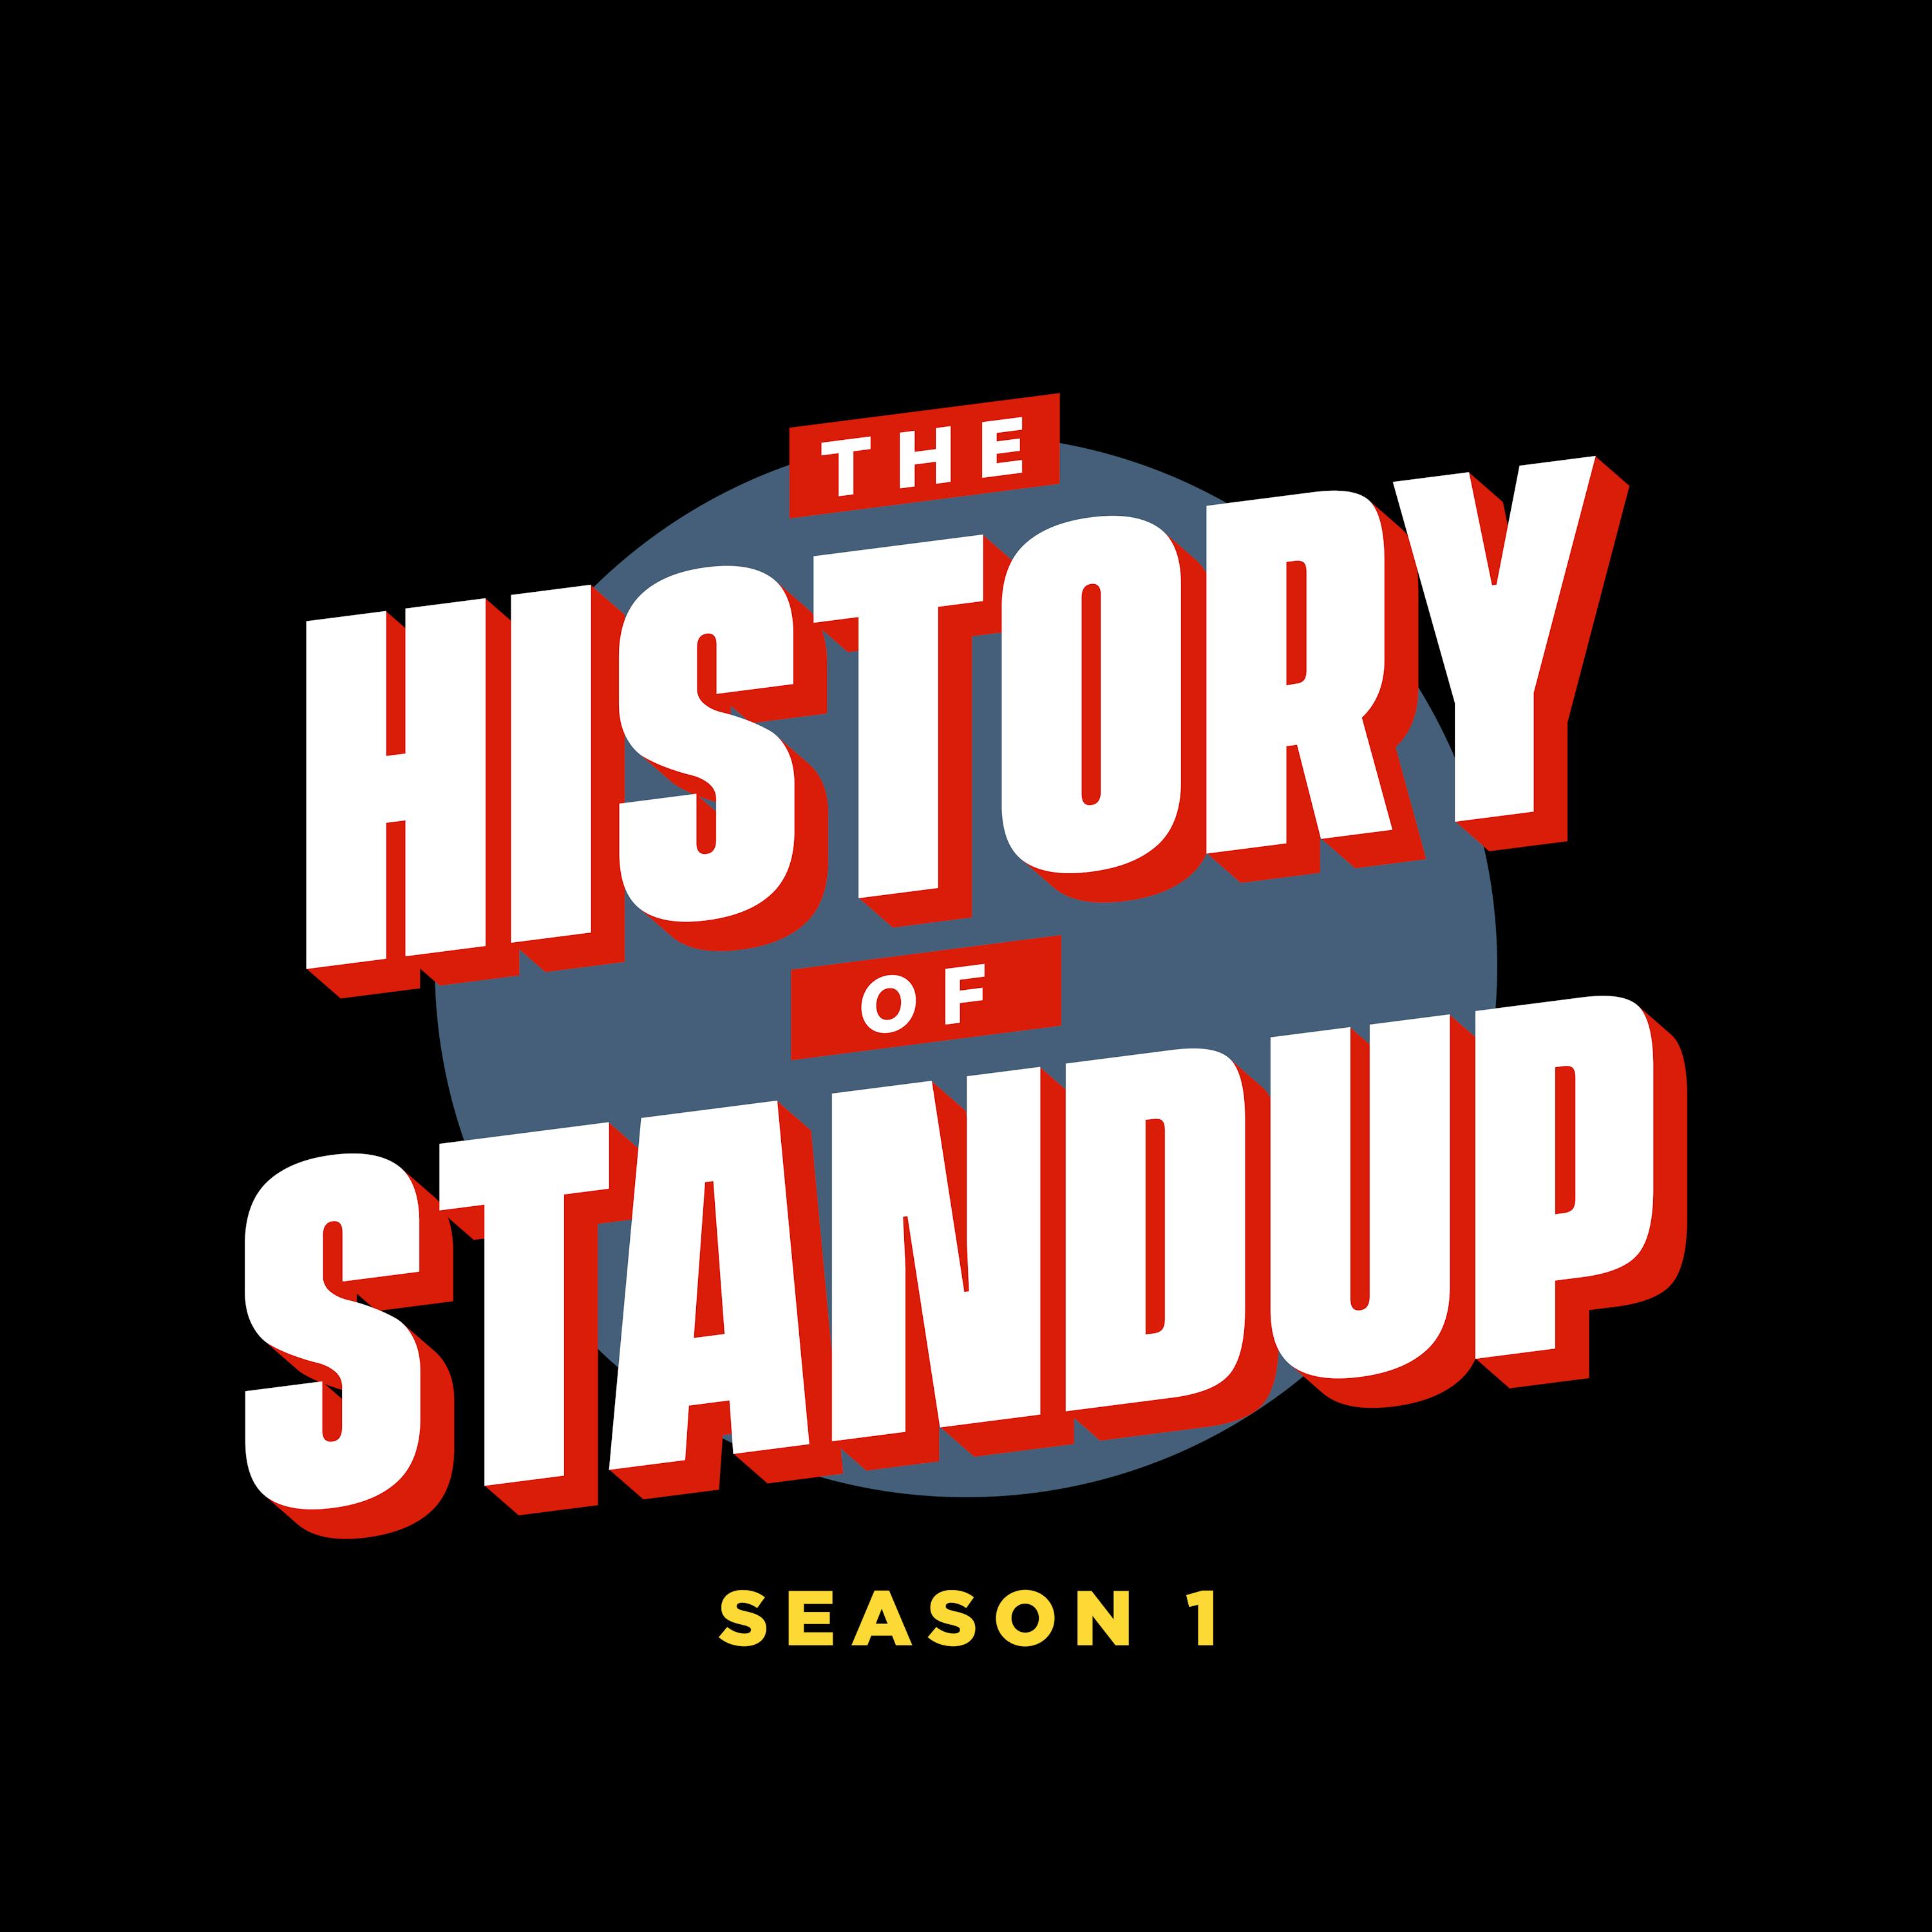 Jimmy Pardo and the History of Comedy Podcasts (Bonus Episode)